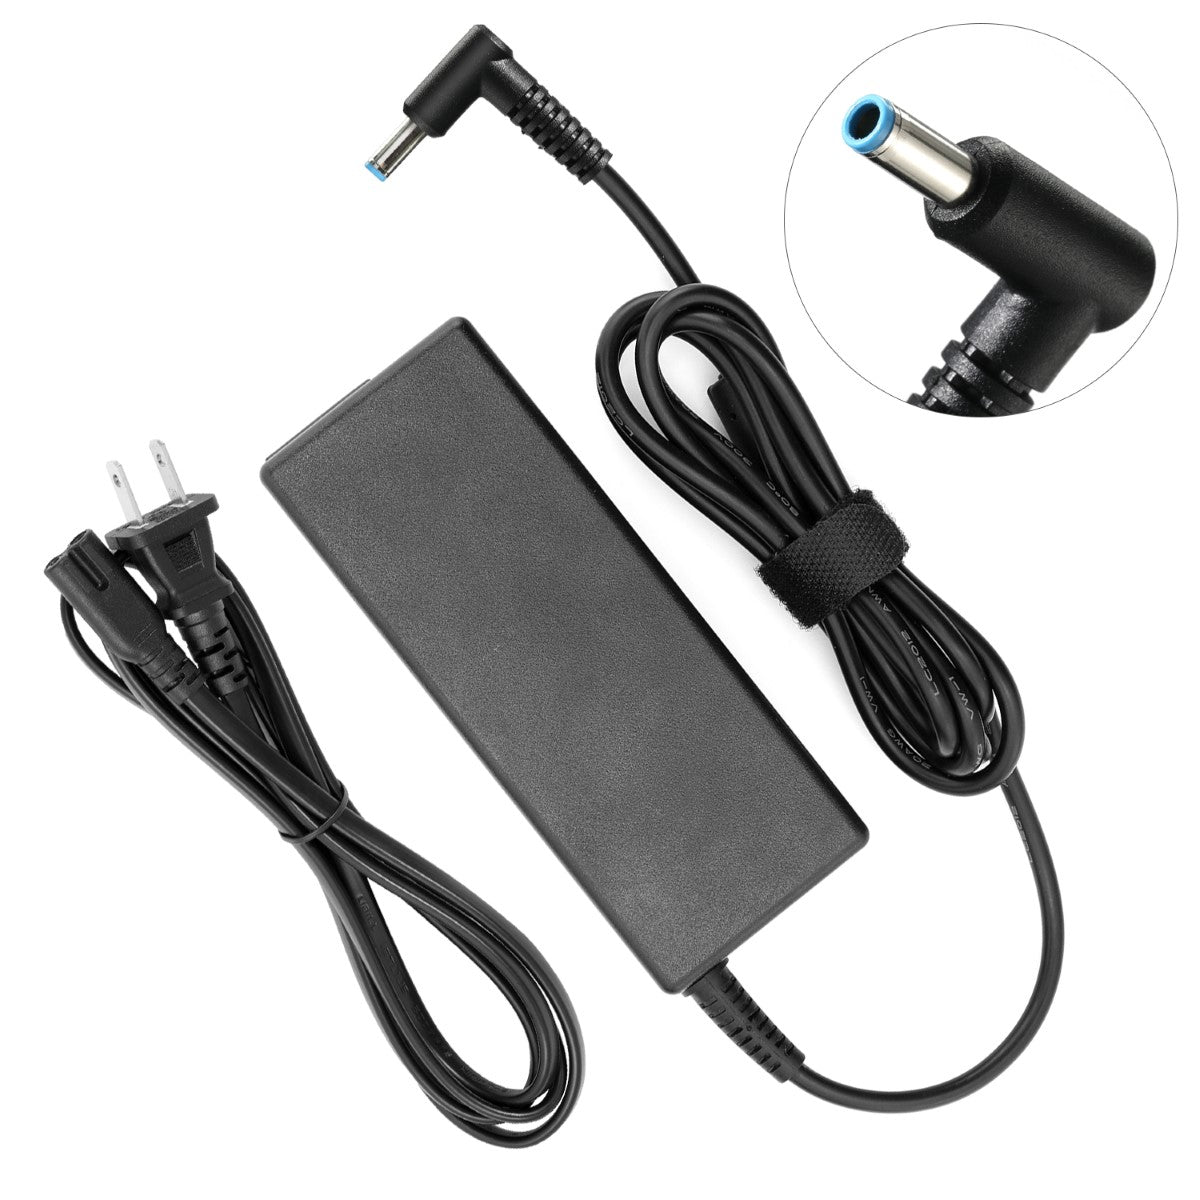 AC Adapter Charger for HP Pavilion 11-h013dx x2 Notebook.